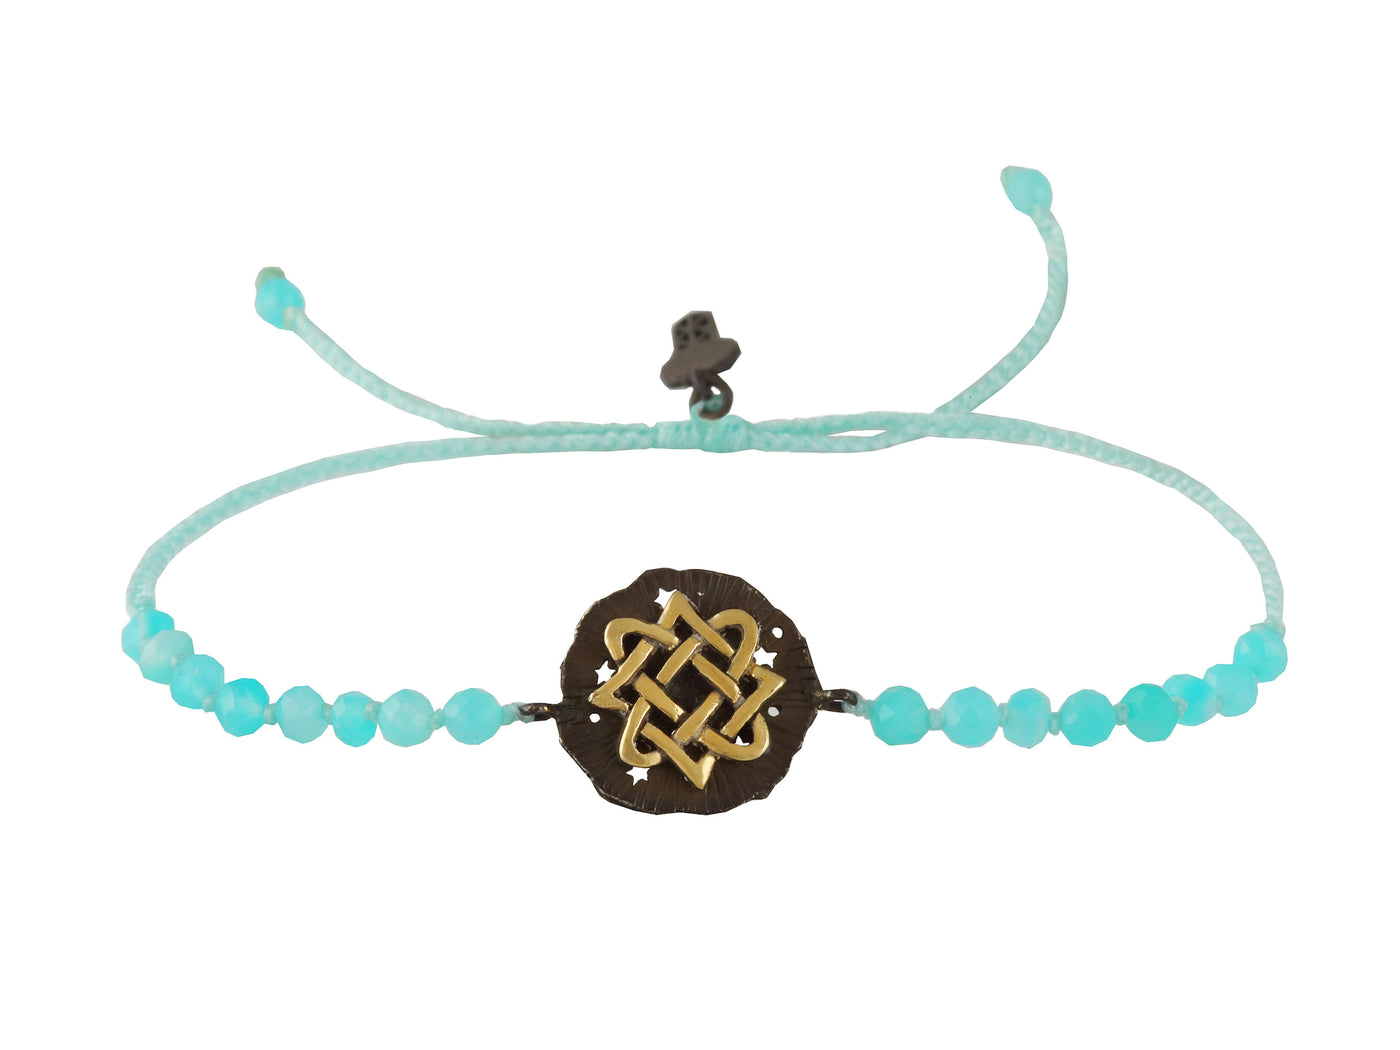 Lada medallion amulet bracelet with beads. Gold plated and oxide